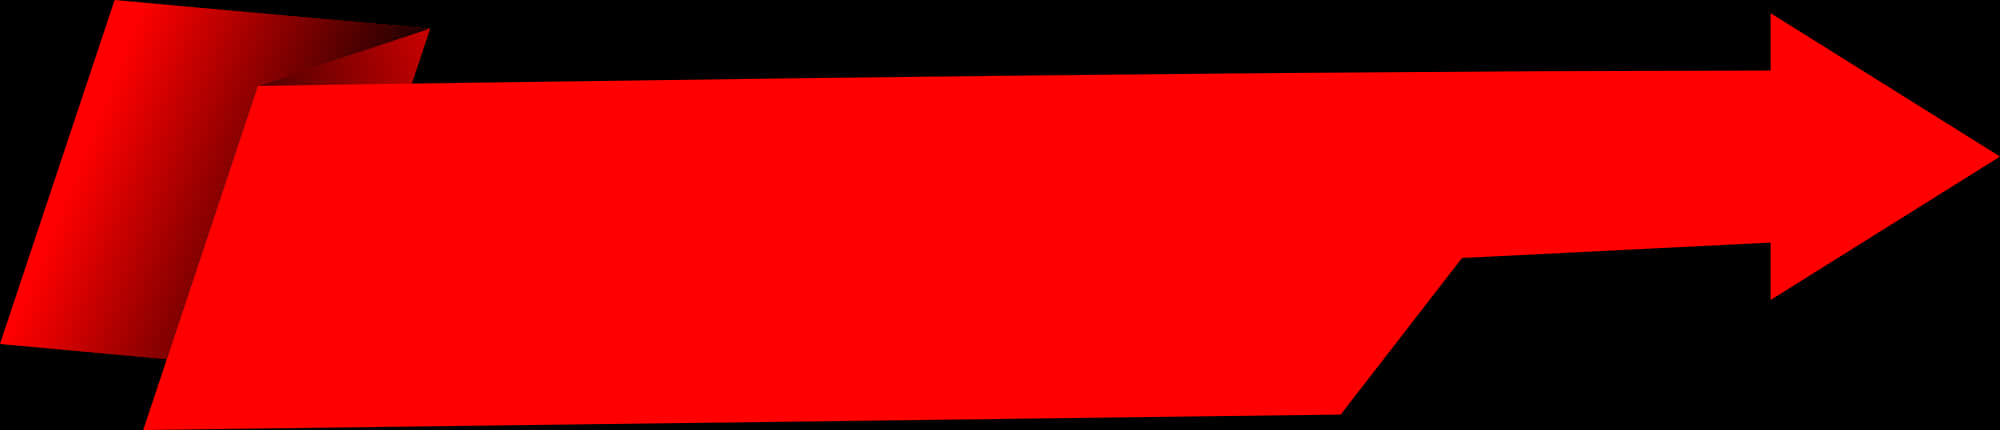 Red Arrow Banner Graphic PNG